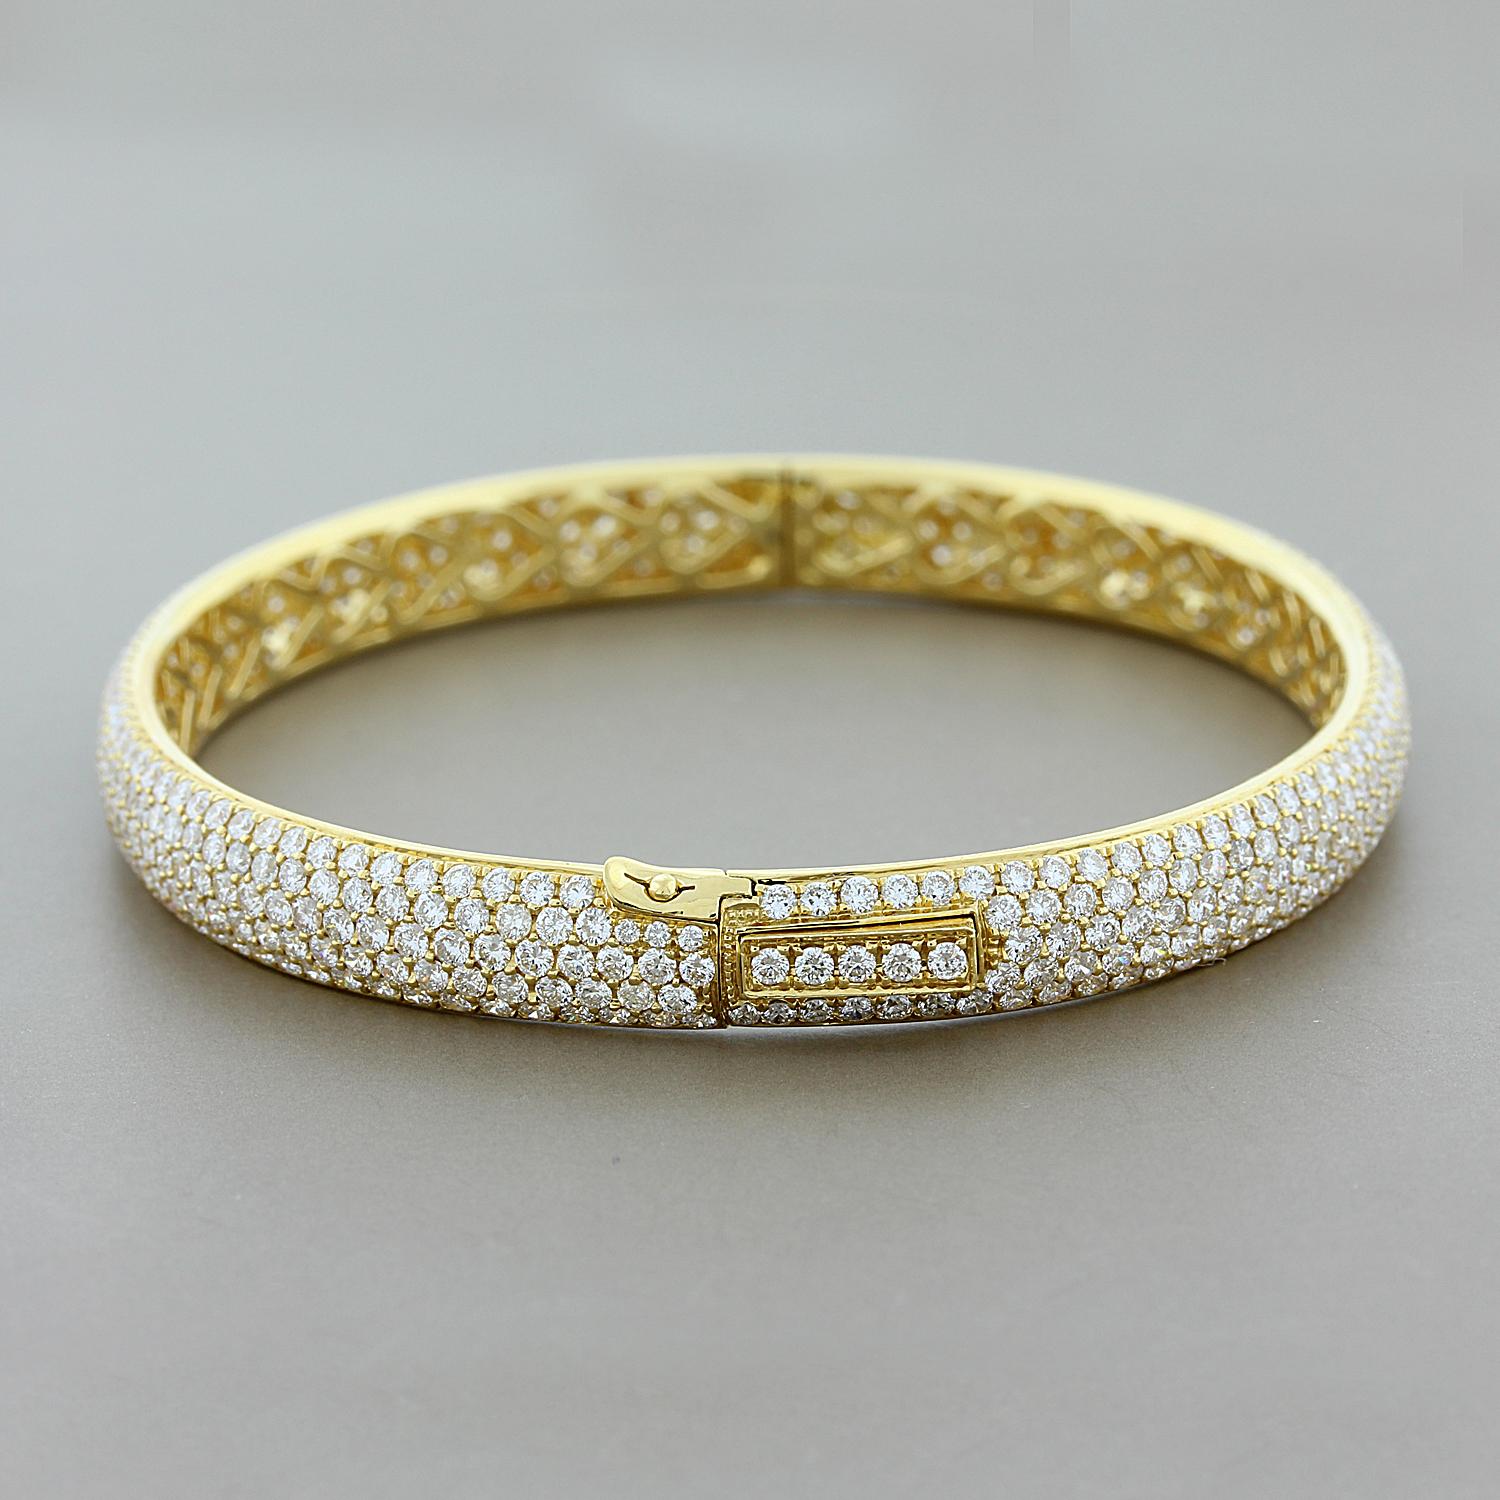 This oval shaped eternity bracelet fits with the natural curve of the wrist. 8.13 carats of round cut, colorless VS quality, pave set diamonds are set throughout the bracelet, including the box clasp. Set in 18K yellow gold with an extra safety